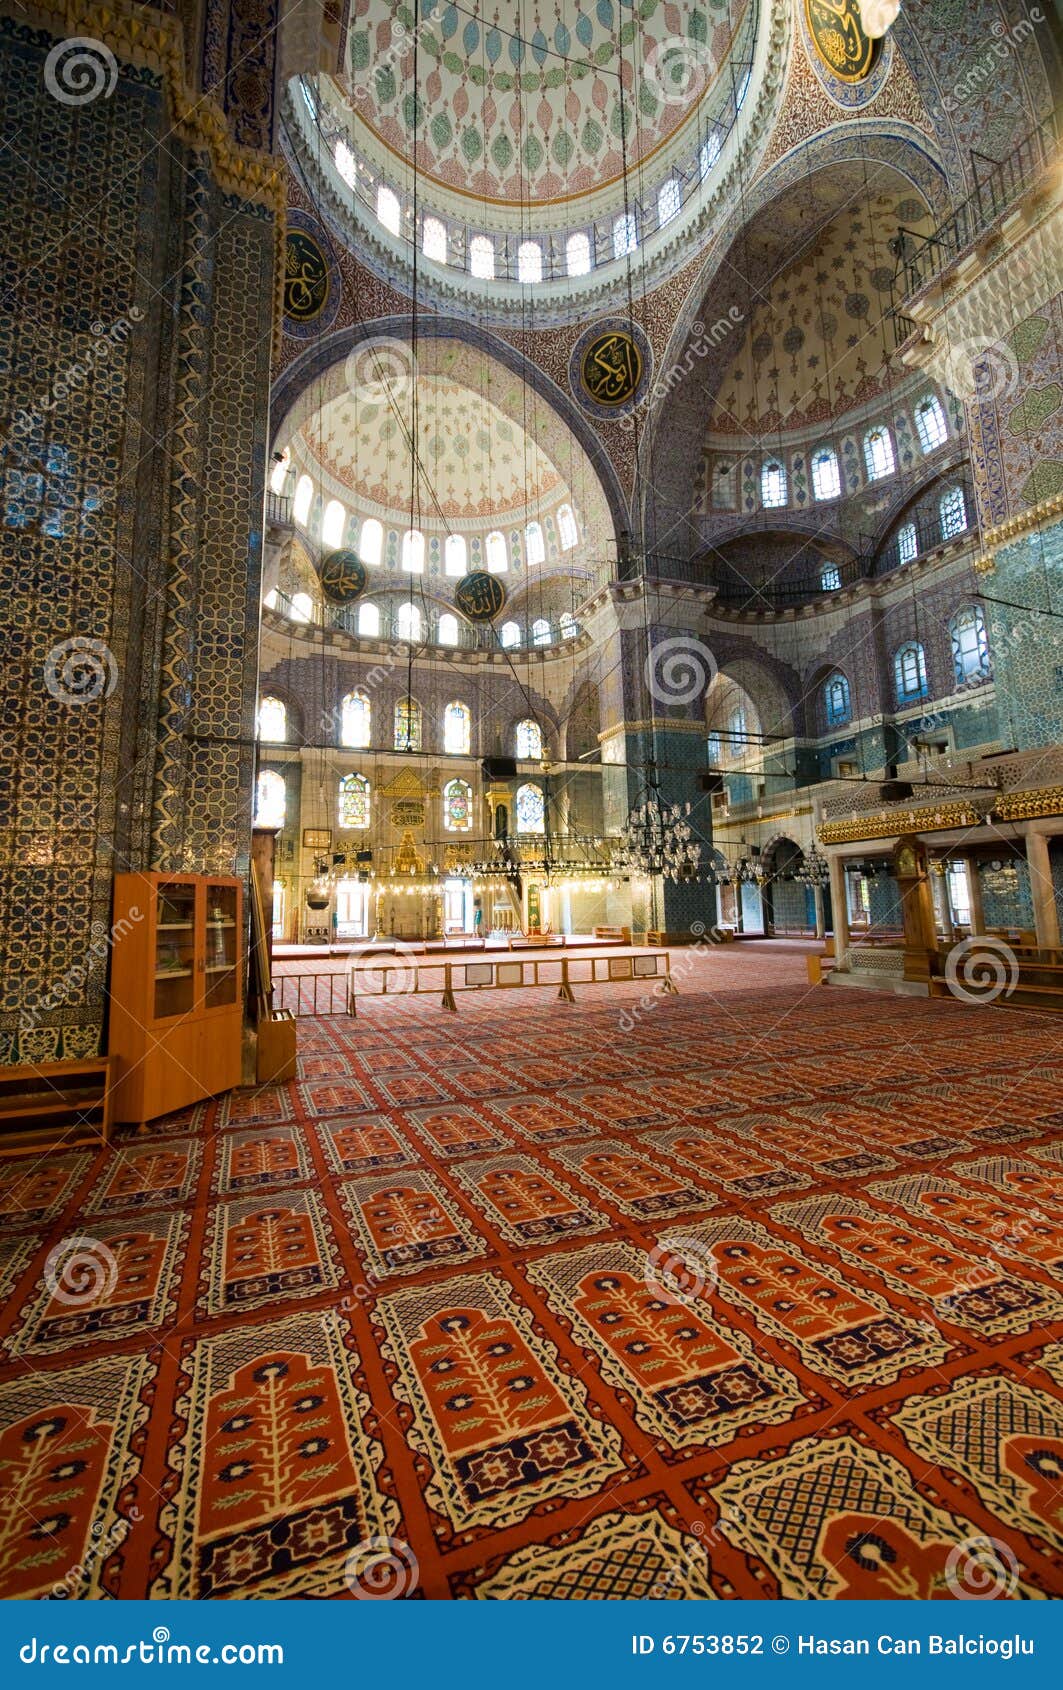 yeni cami (new mosque) in istanbul, turkey